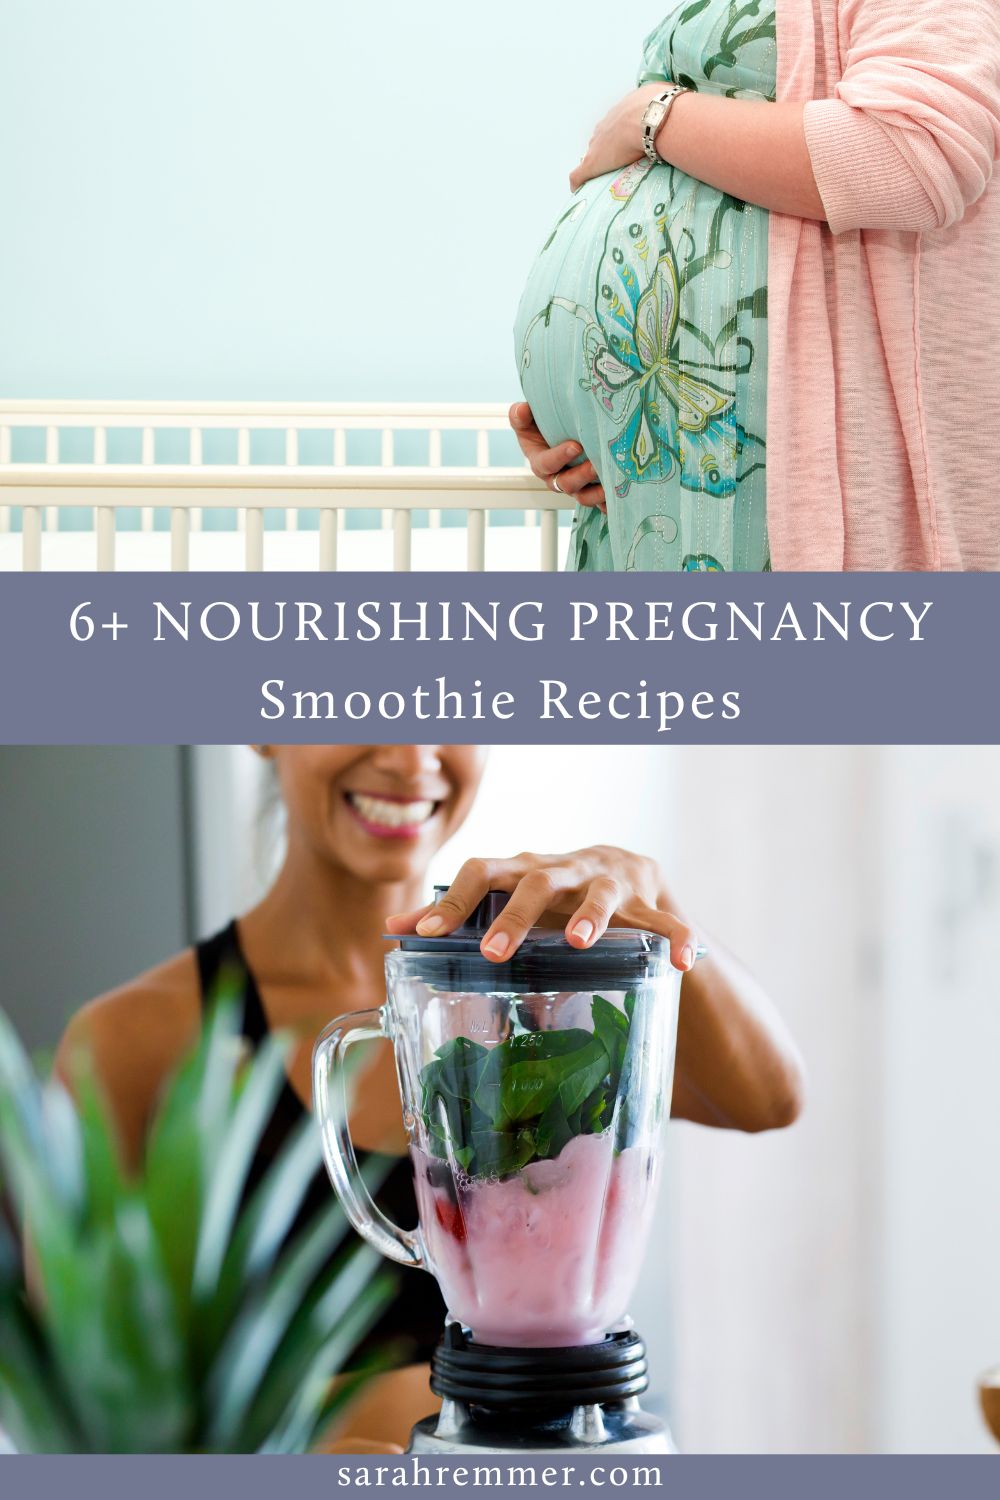 Whipping up a pregnancy smoothie is a delicious, nutrient-dense option, especially when you’re feeling nauseous or experiencing pregnancy-related food aversions.